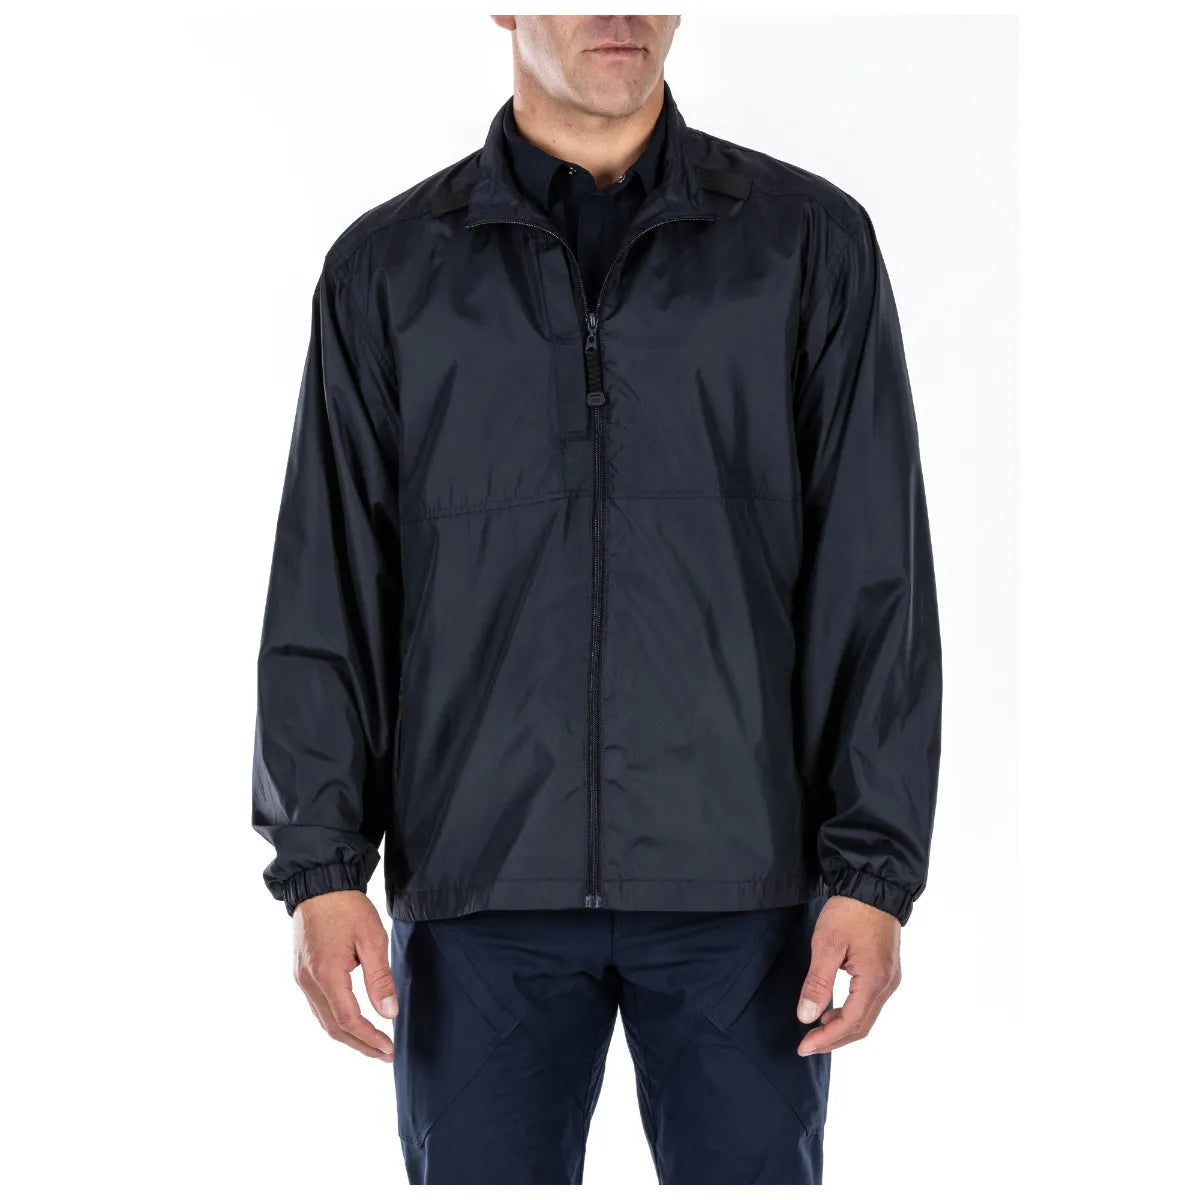 5.11 Tactical Packable Jacket 48035 - Clothing & Accessories